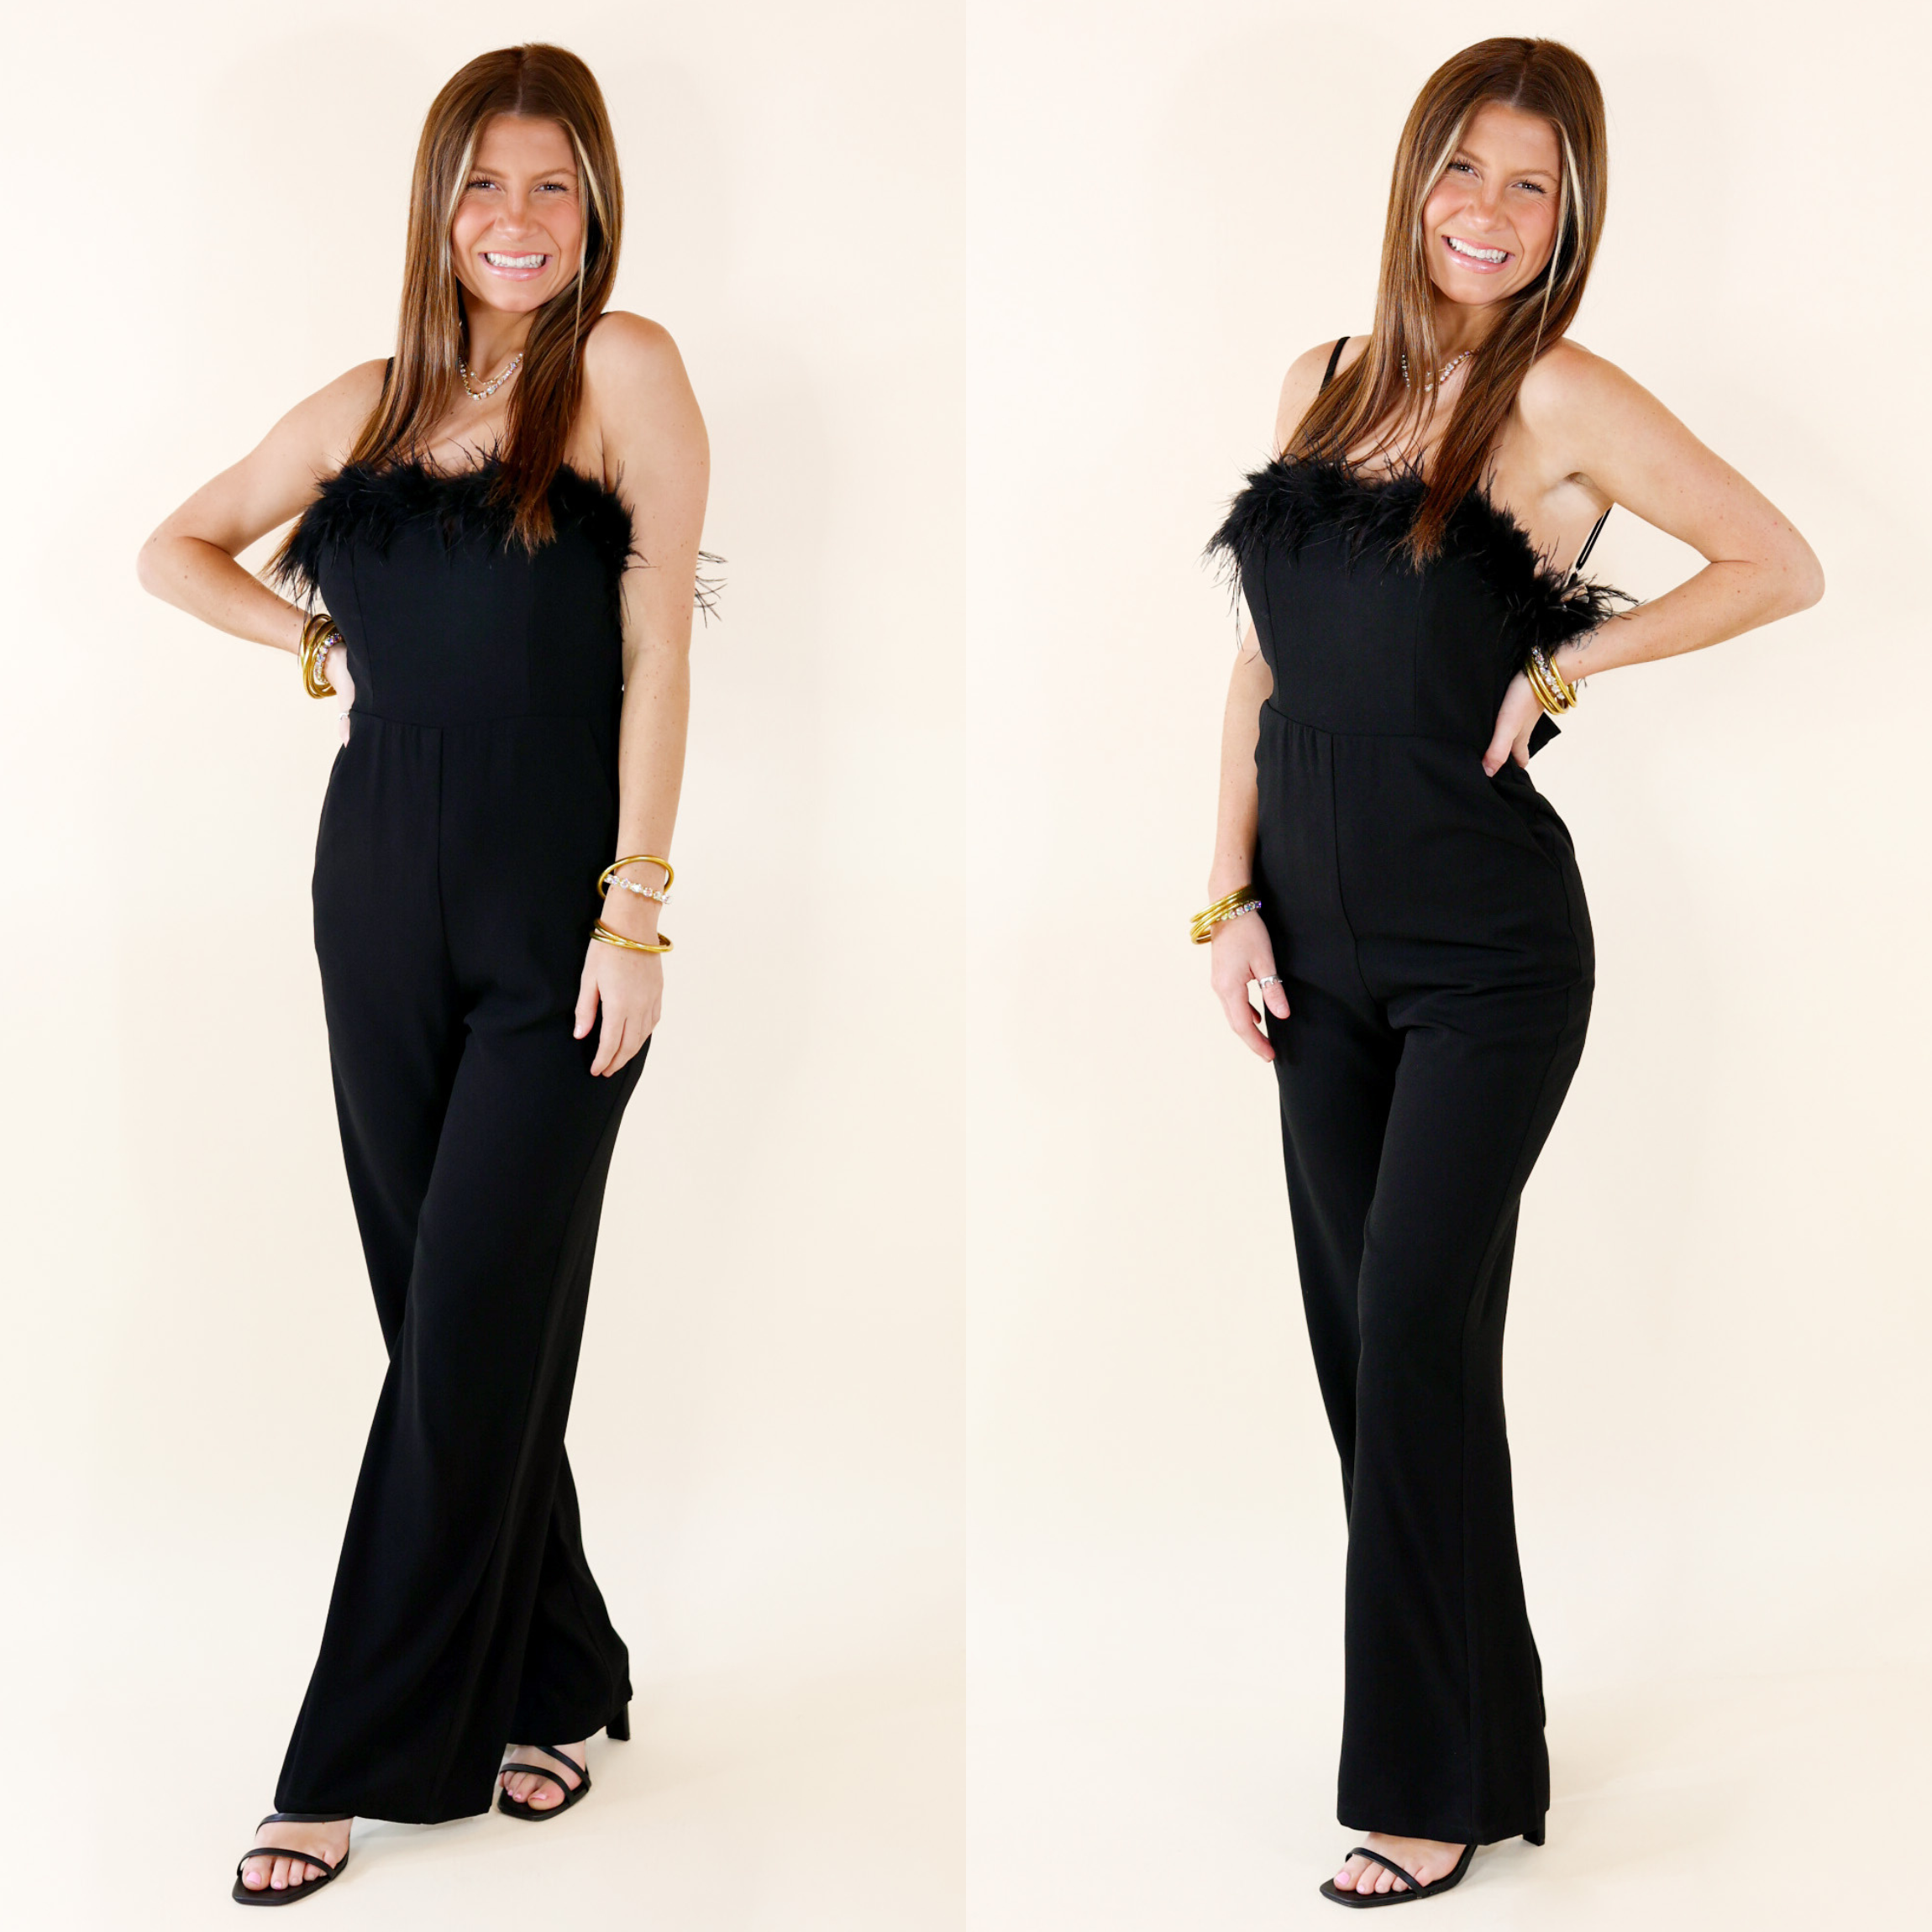 Black Jumpsuit with spaghetti straps. The jumper has feathers along the top of it. The model is wearing black heels and gold jewelry. 